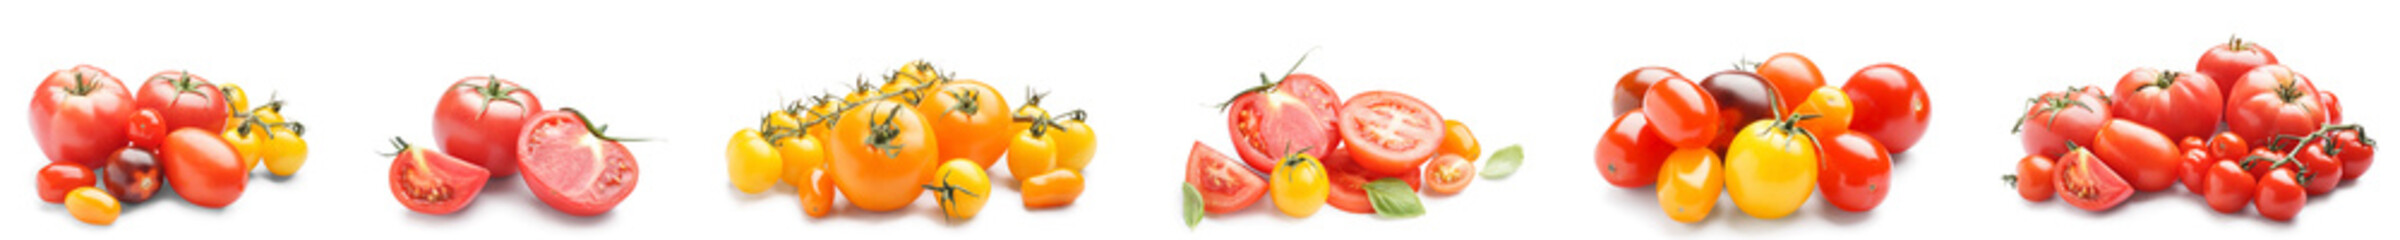 Set of different tomatoes isolated on white